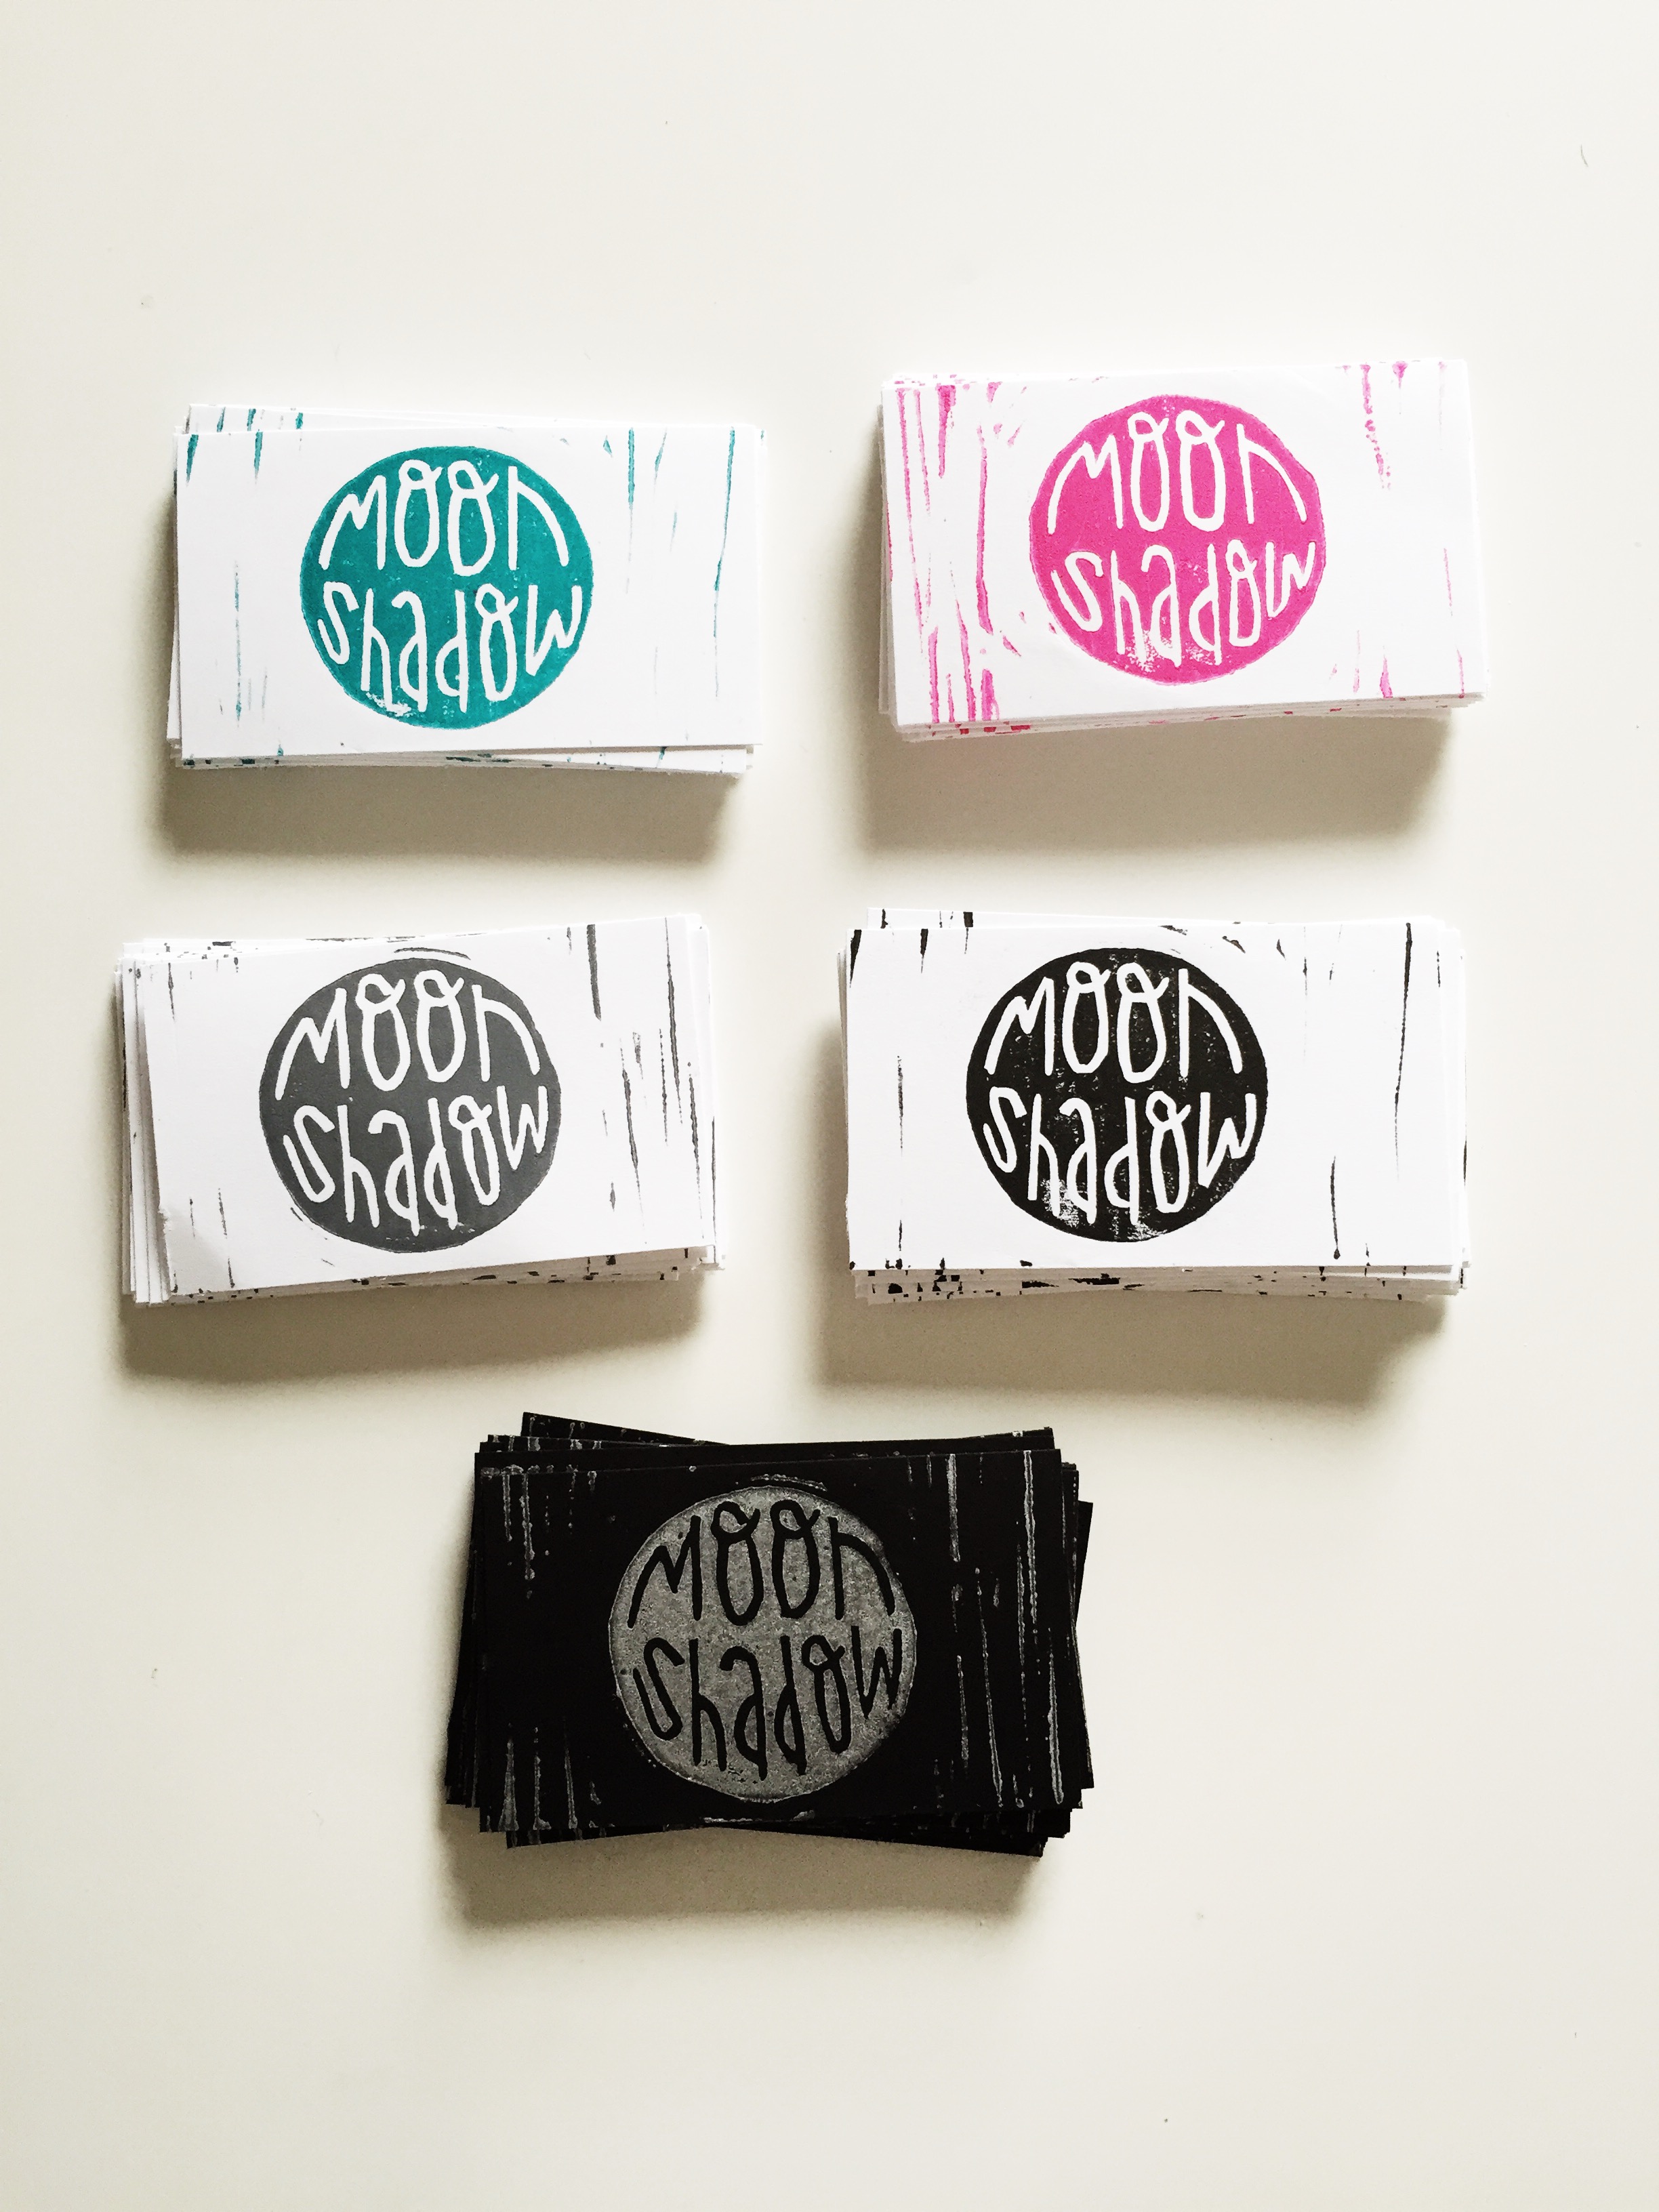 Extra: 8.) Hand out awesome business cards